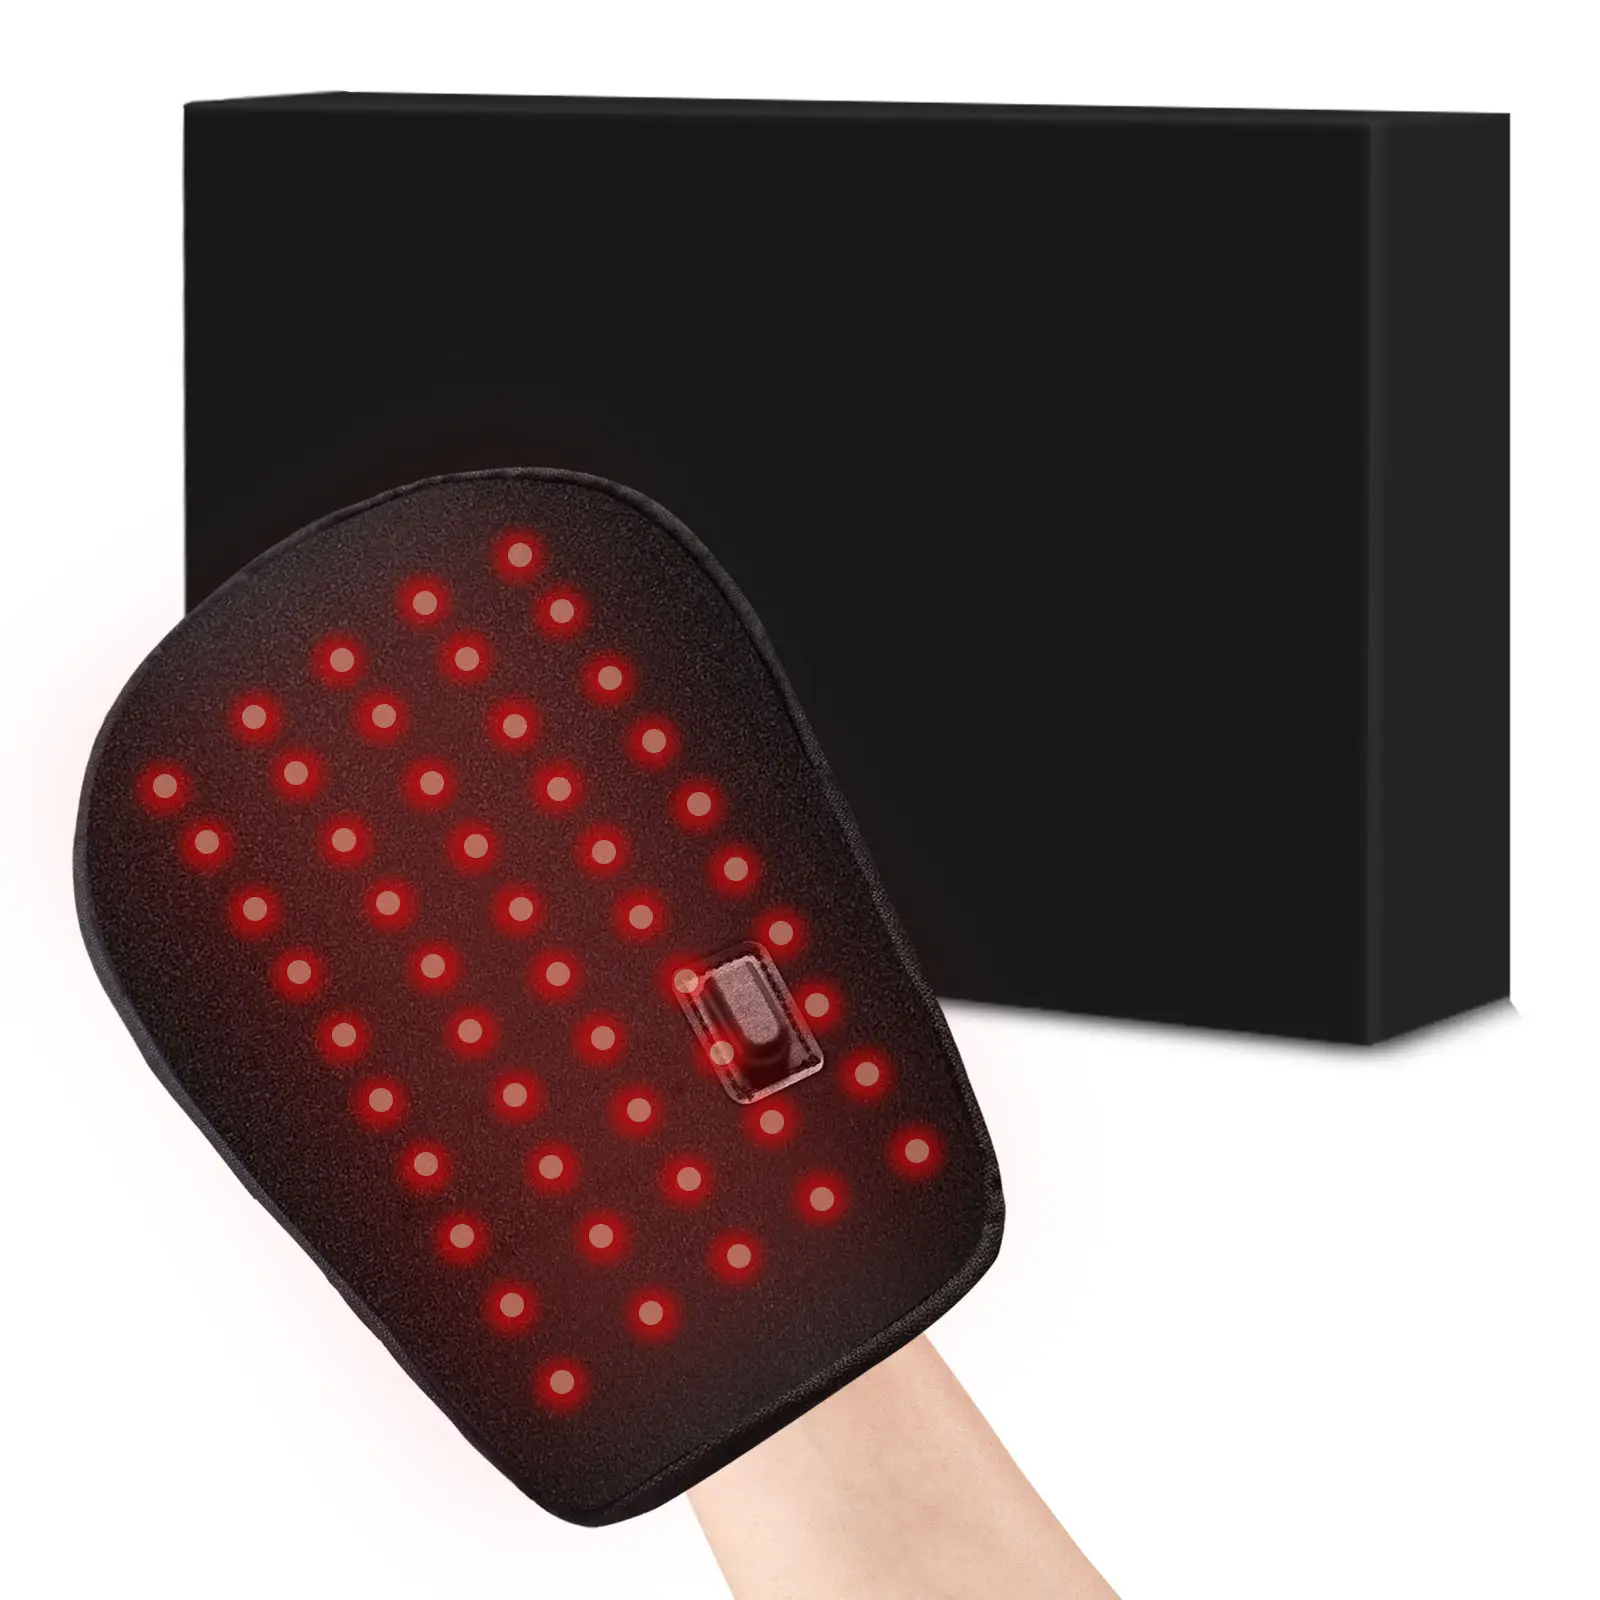 Red light therapy for relieving muscle pain in households using near-infrared red light from the palm red light therapy gloves